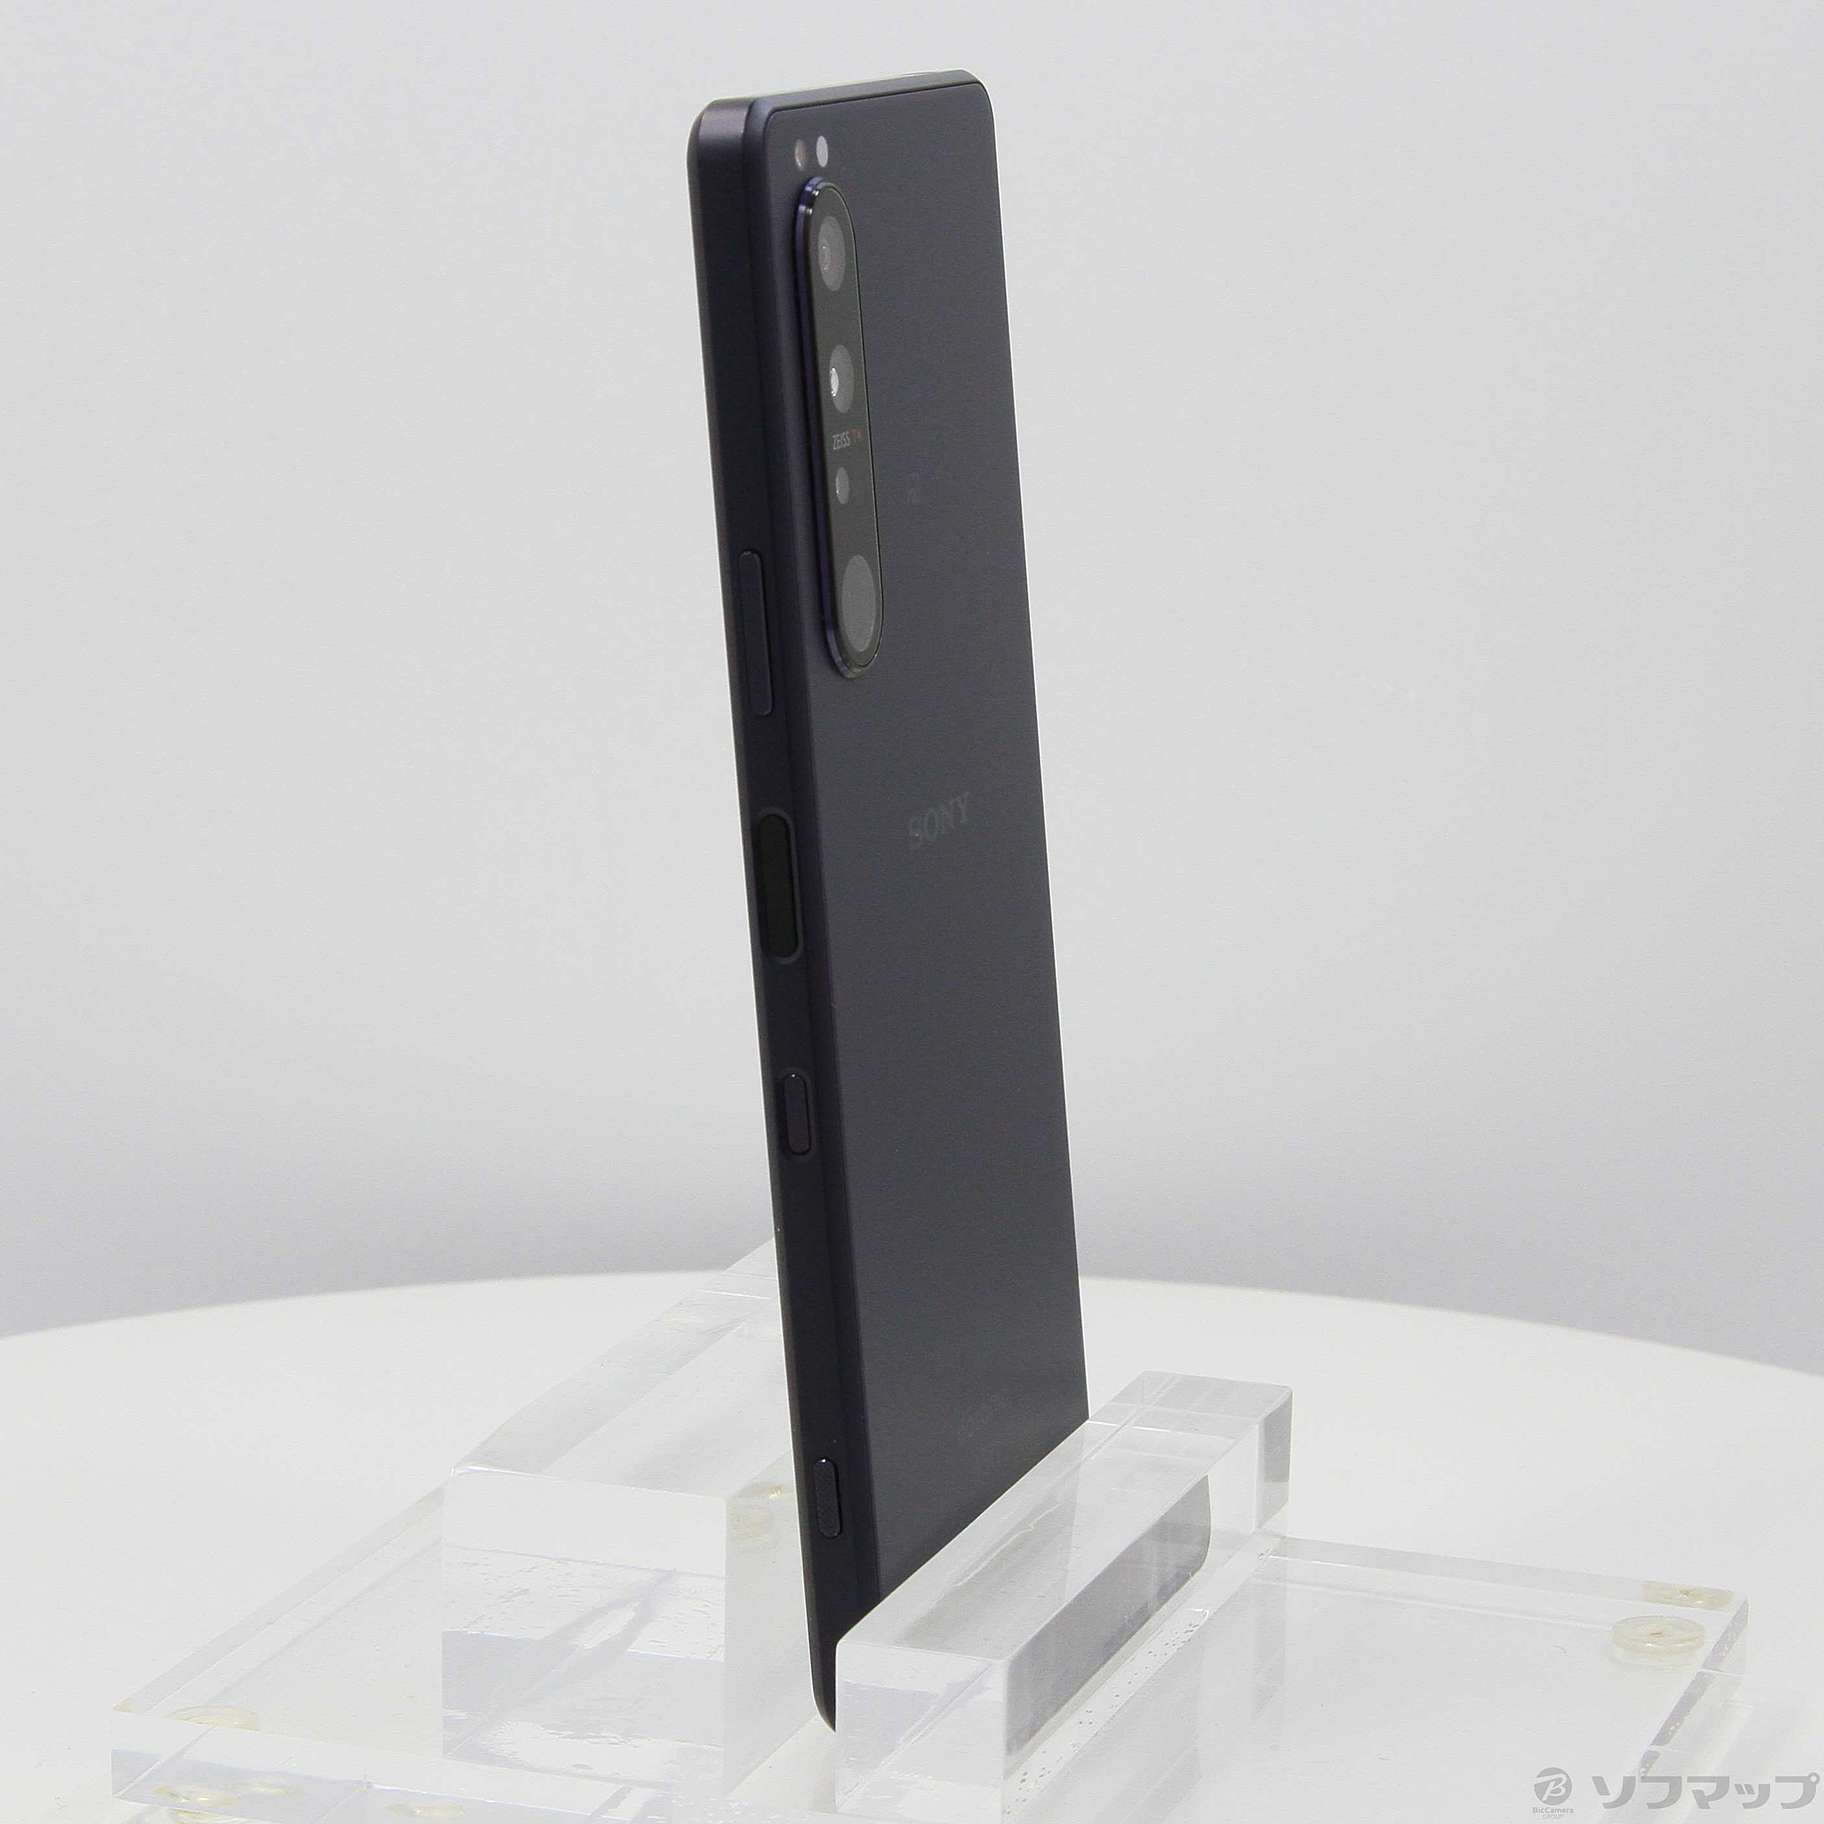 SONY(ソニー) Xperia 1 III 256GB フロストグレー SO-51B docomoロック